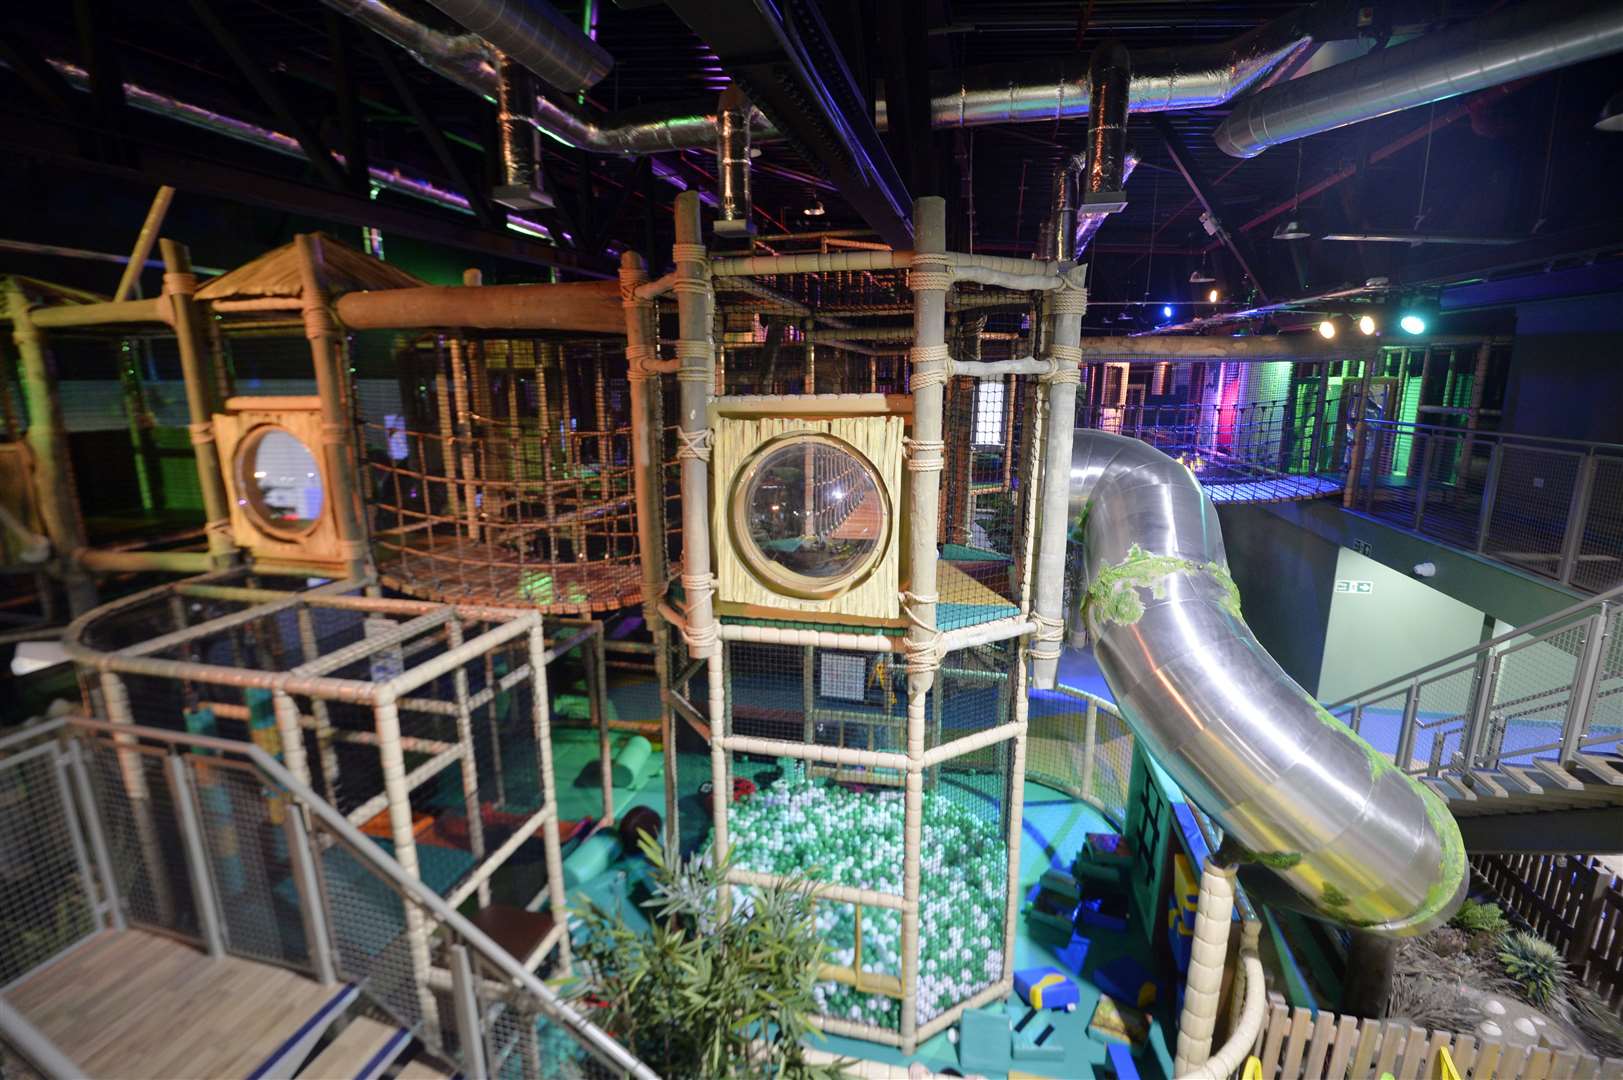 Dinotropolis is a dinosaur-themed play area for children to explore inside the shopping centre. Picture: The Imageworks